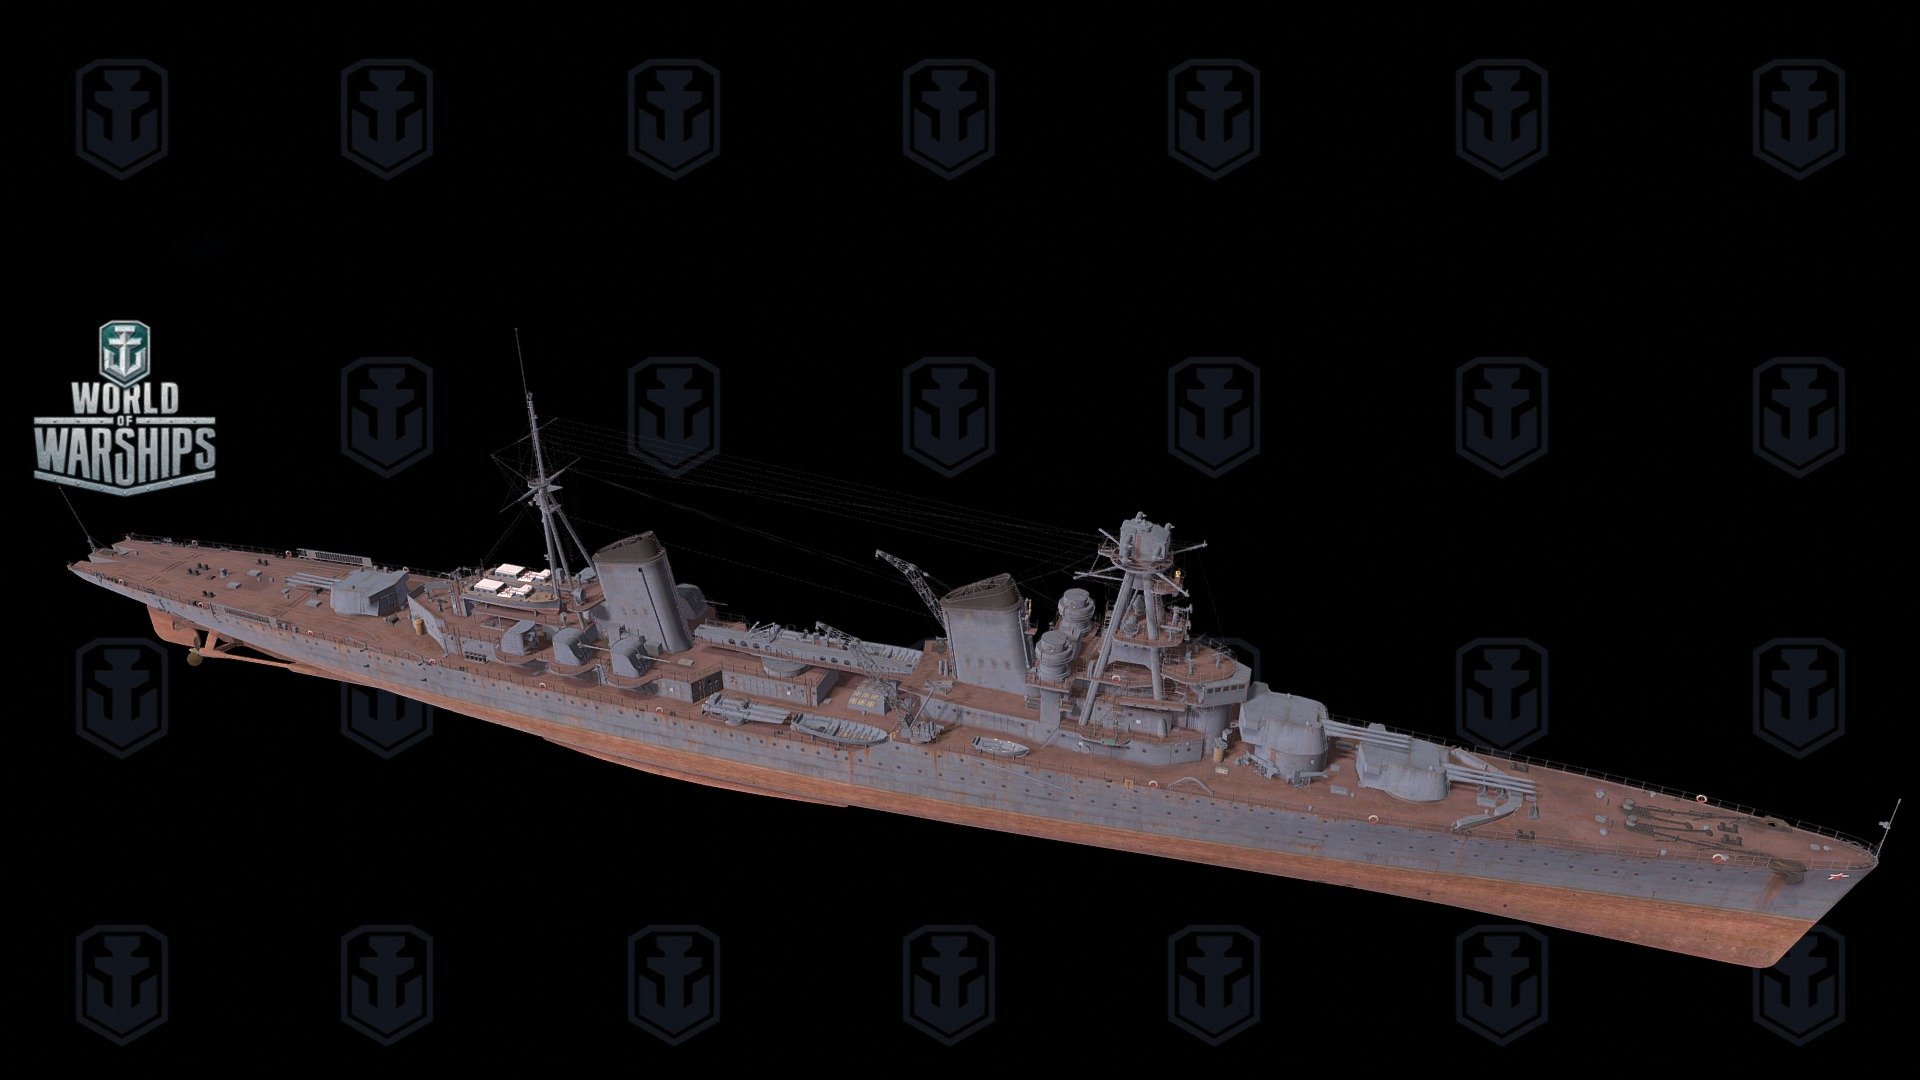 Voroshilov — Soviet Tier V cruiser.

One of the first large warships designed and built in the U.S.S.R. (Project 26). Despite her small displacement, she was equipped with very powerful long-range main guns and had a good speed. In contrast to the majority of her contemporaries, she had weak armor.

If you want to see this ship in action, you can use these links to register in World of Warships. If you choose so, you'll get a week of WoWS premium account and premium battleship Dreadnought.


CIS server
NA server
EU server
SEA server 

Please note that this offer ends on 07/01/2022 3d model